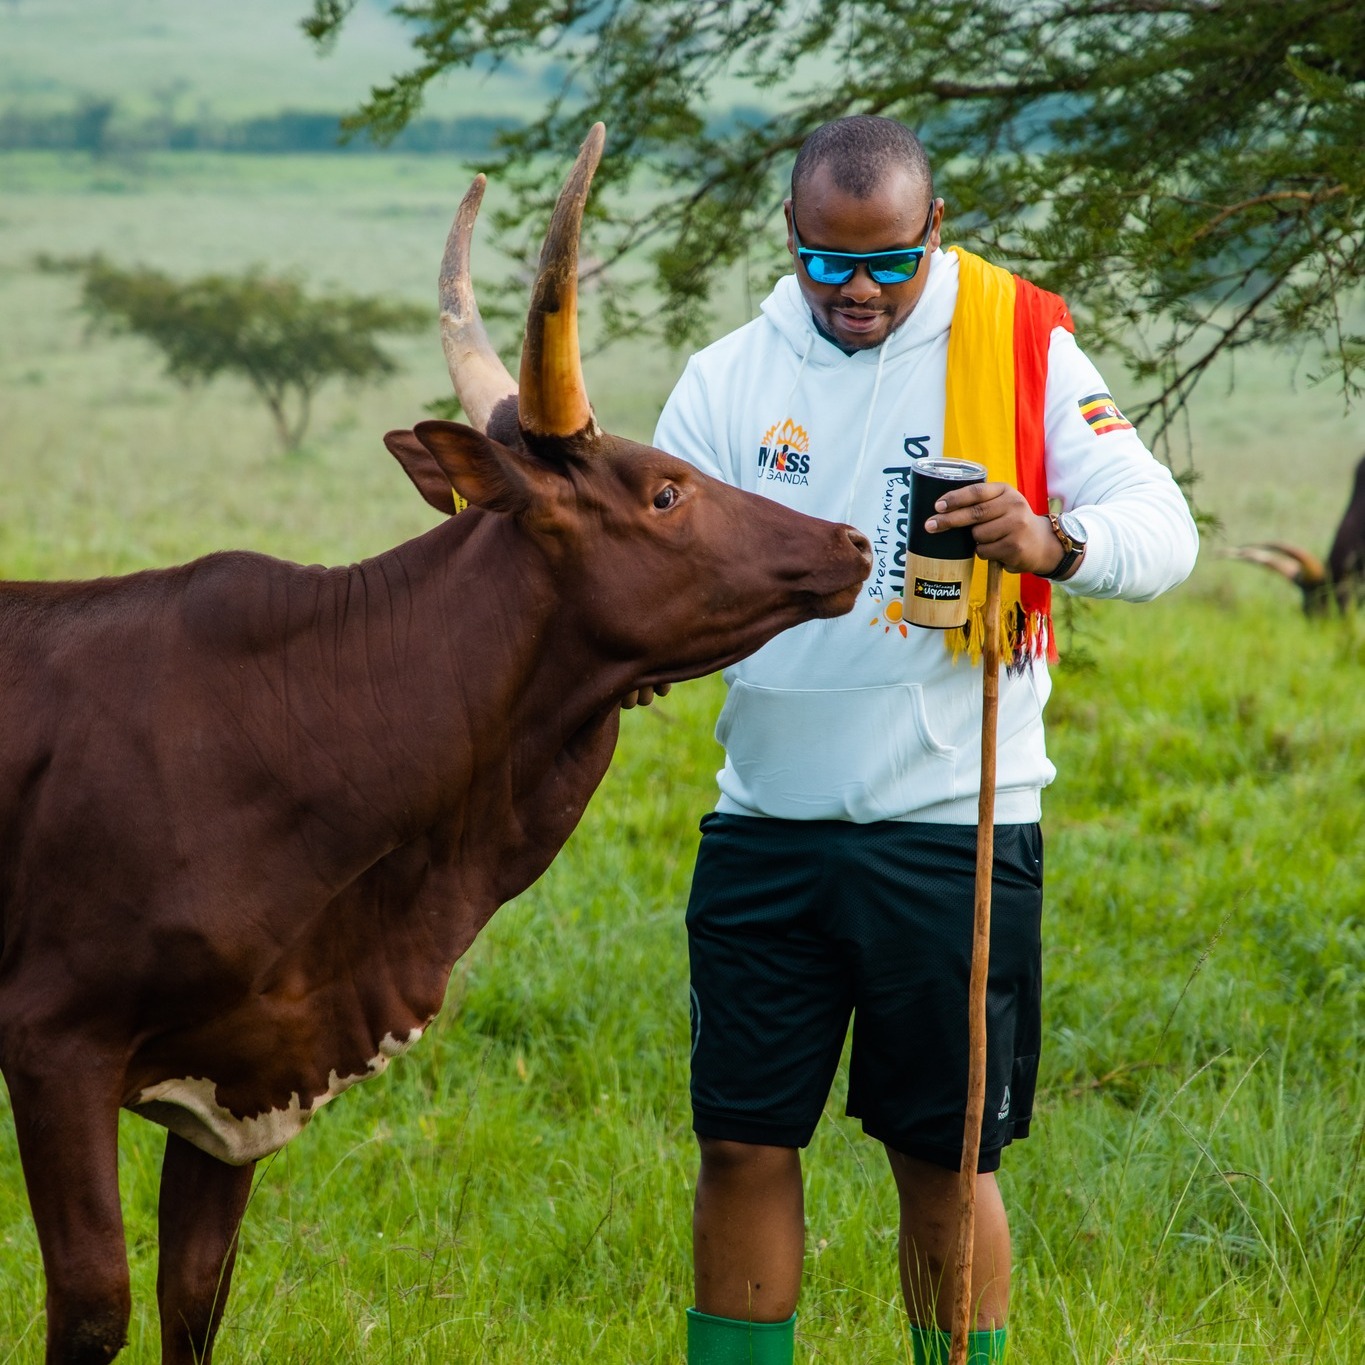 As you explore our lodge, you will witness the symbiotic relationship between humans and cattle. Gain insights into the sustainable practices we employ to ensure the well-being of our livestock and the preservation of our environment. This immersive experience will leave you with a deeper understanding and appreciation for the rich culture of cattle keeping and milking.
📧 reservations@emburarafarmlodge.com
☎️ +256776210872 | +256776200080 | +256706666000
🌐 www.emburarafarmlodge.com
#EmburaraFarmLodge #EmburaraLodges #LifeOnTheFarm #FarmStay #AuthenticExperience #Mbarara #WesternUganda #FarmLodge #AnkoleCow